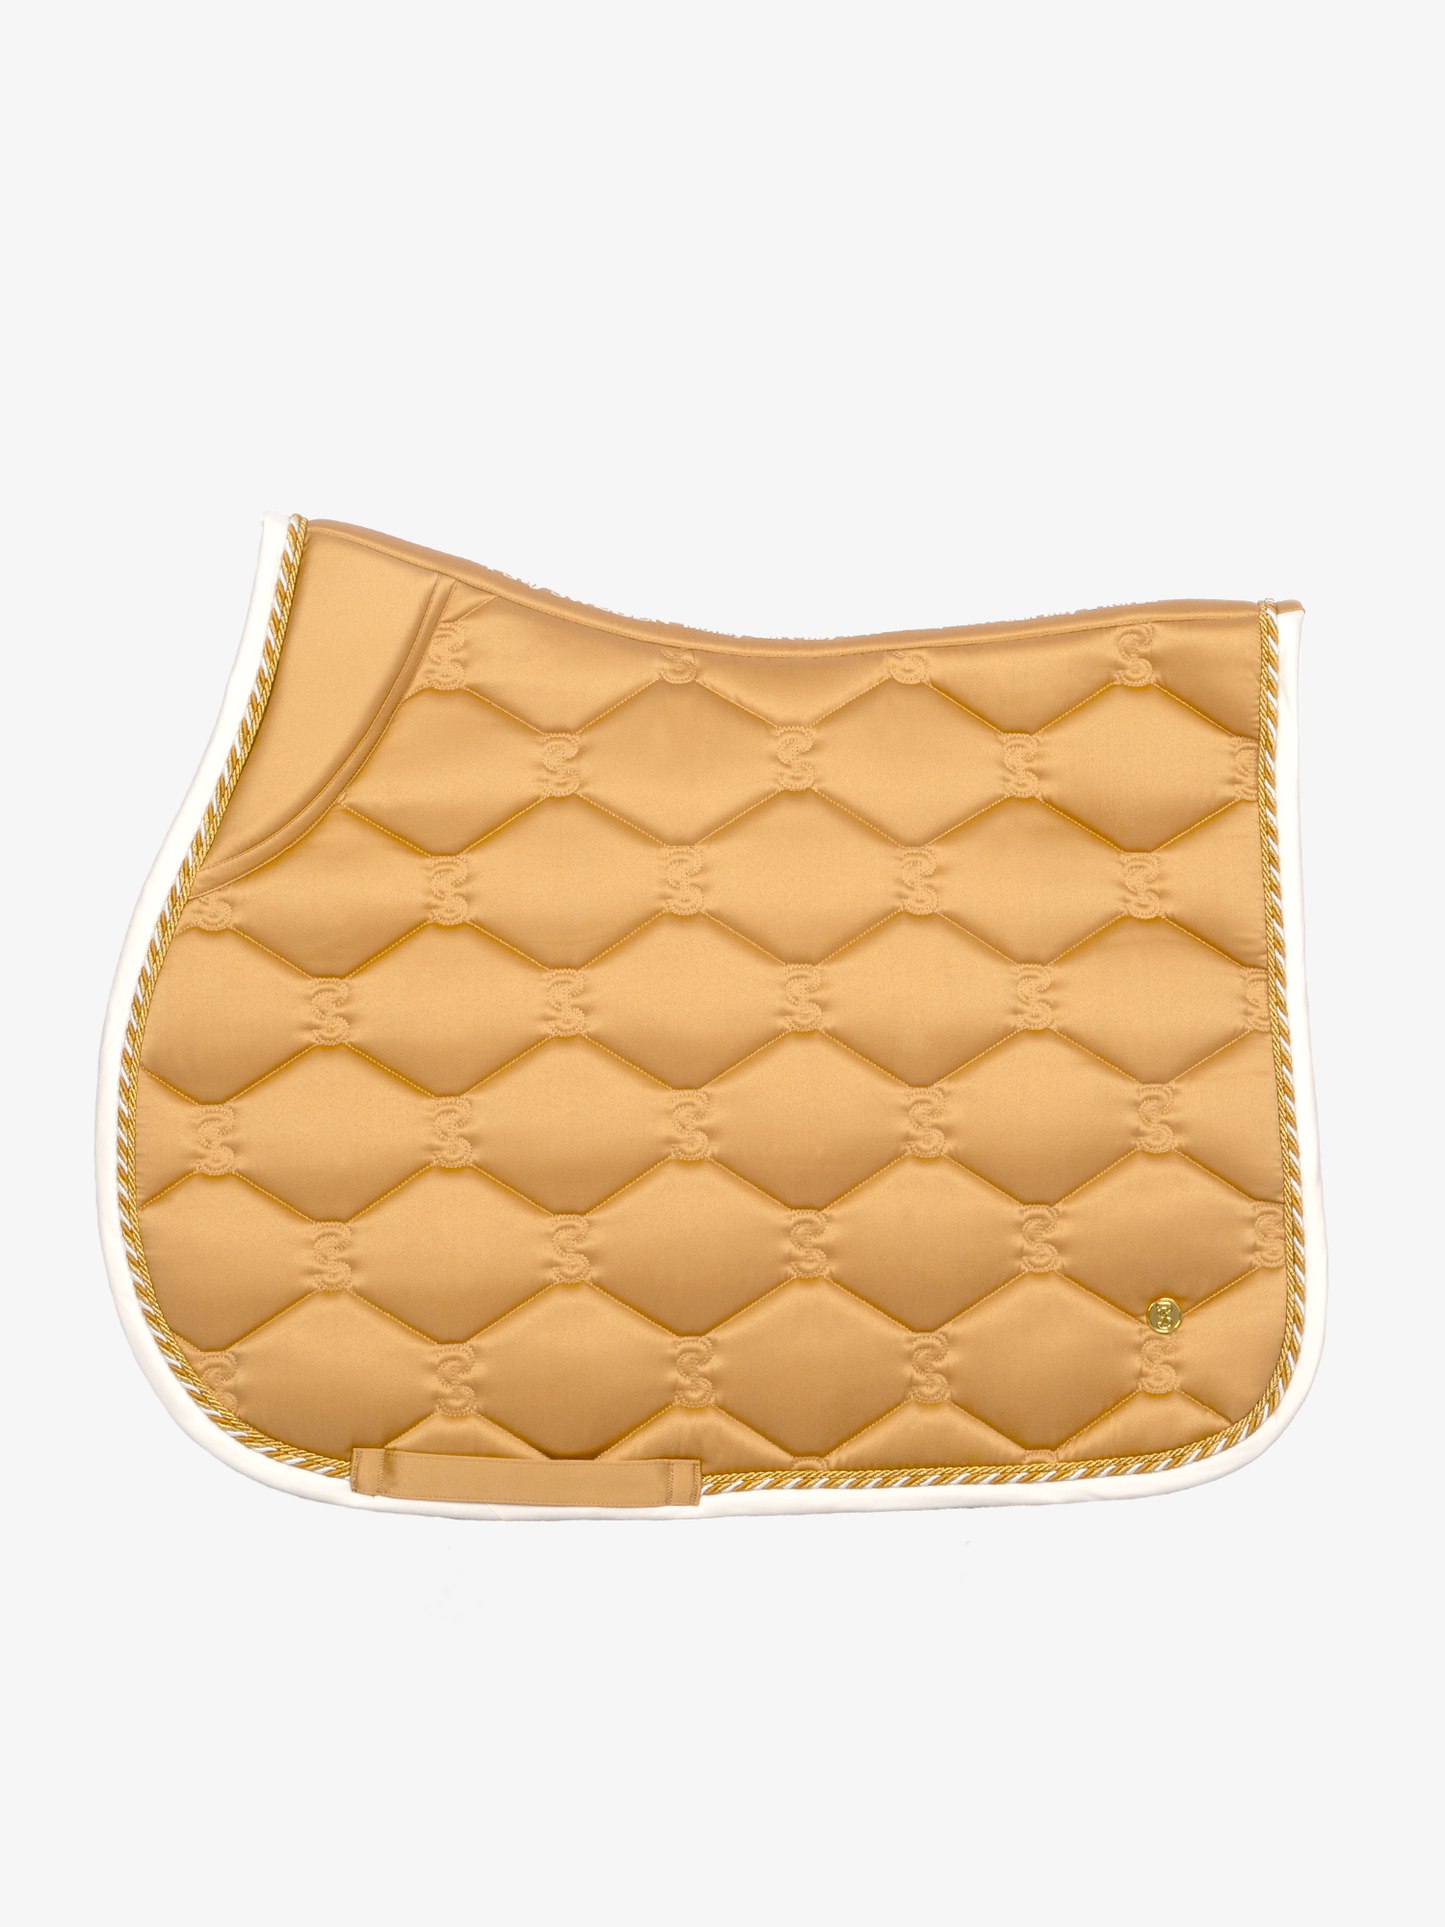 PS of Sweden Signature jump pad - Rust brown